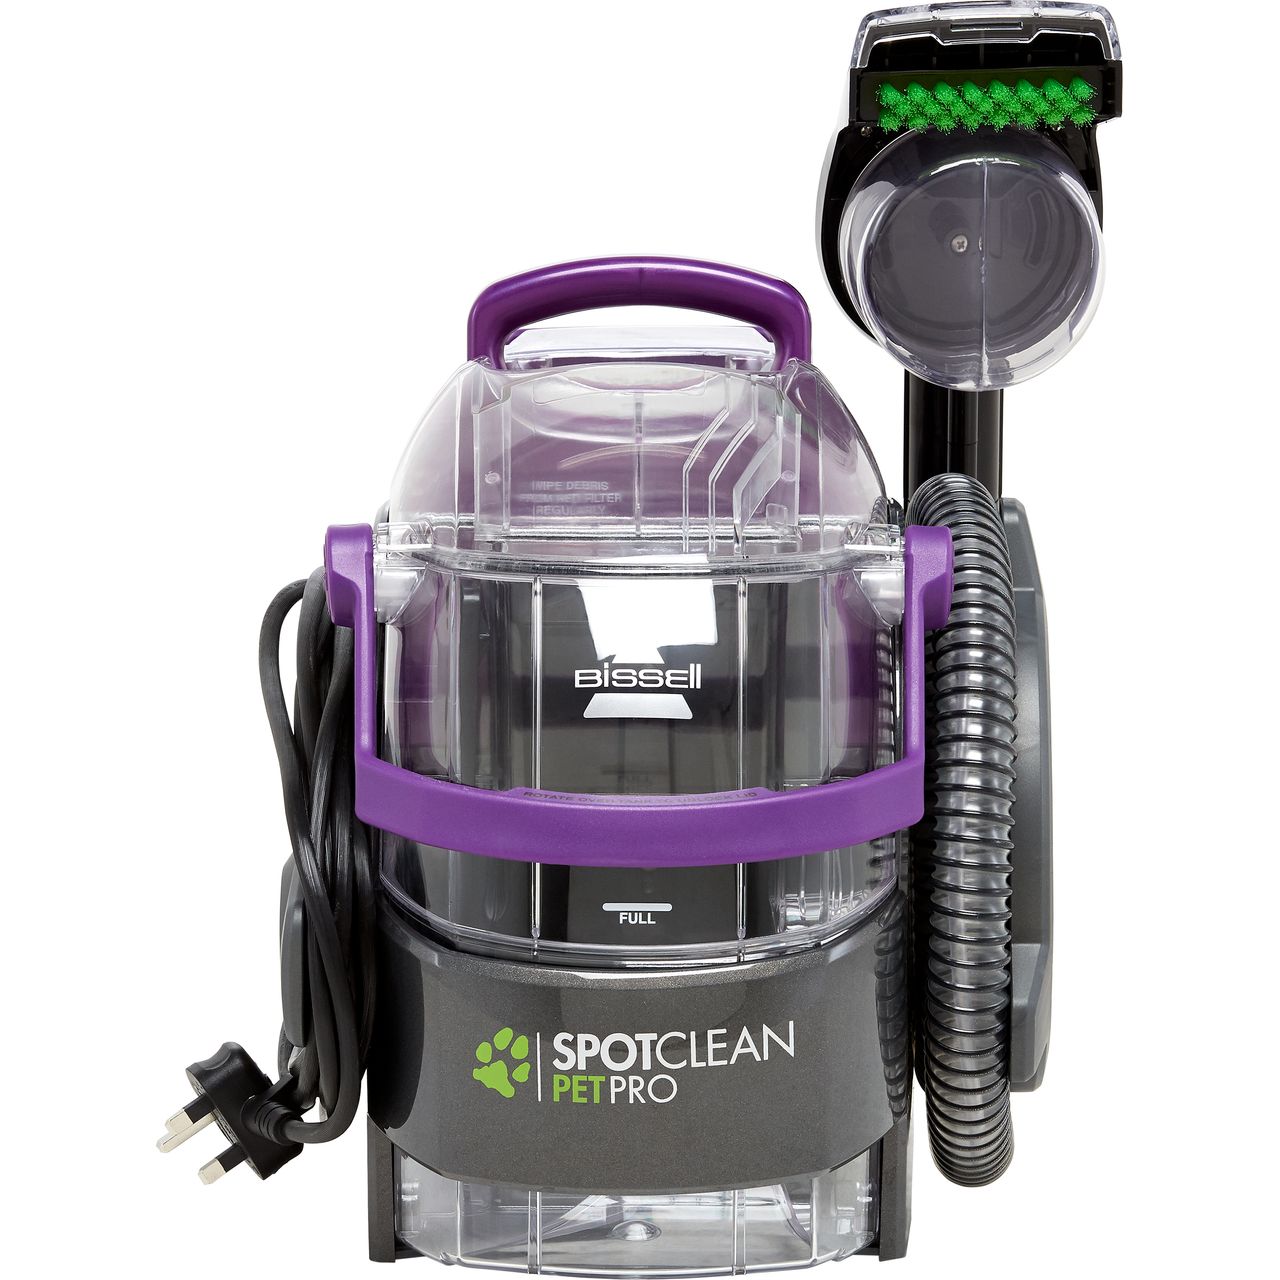 Bissell SpotClean Pet Pro Carpet Cleaner, 15588, Brand new